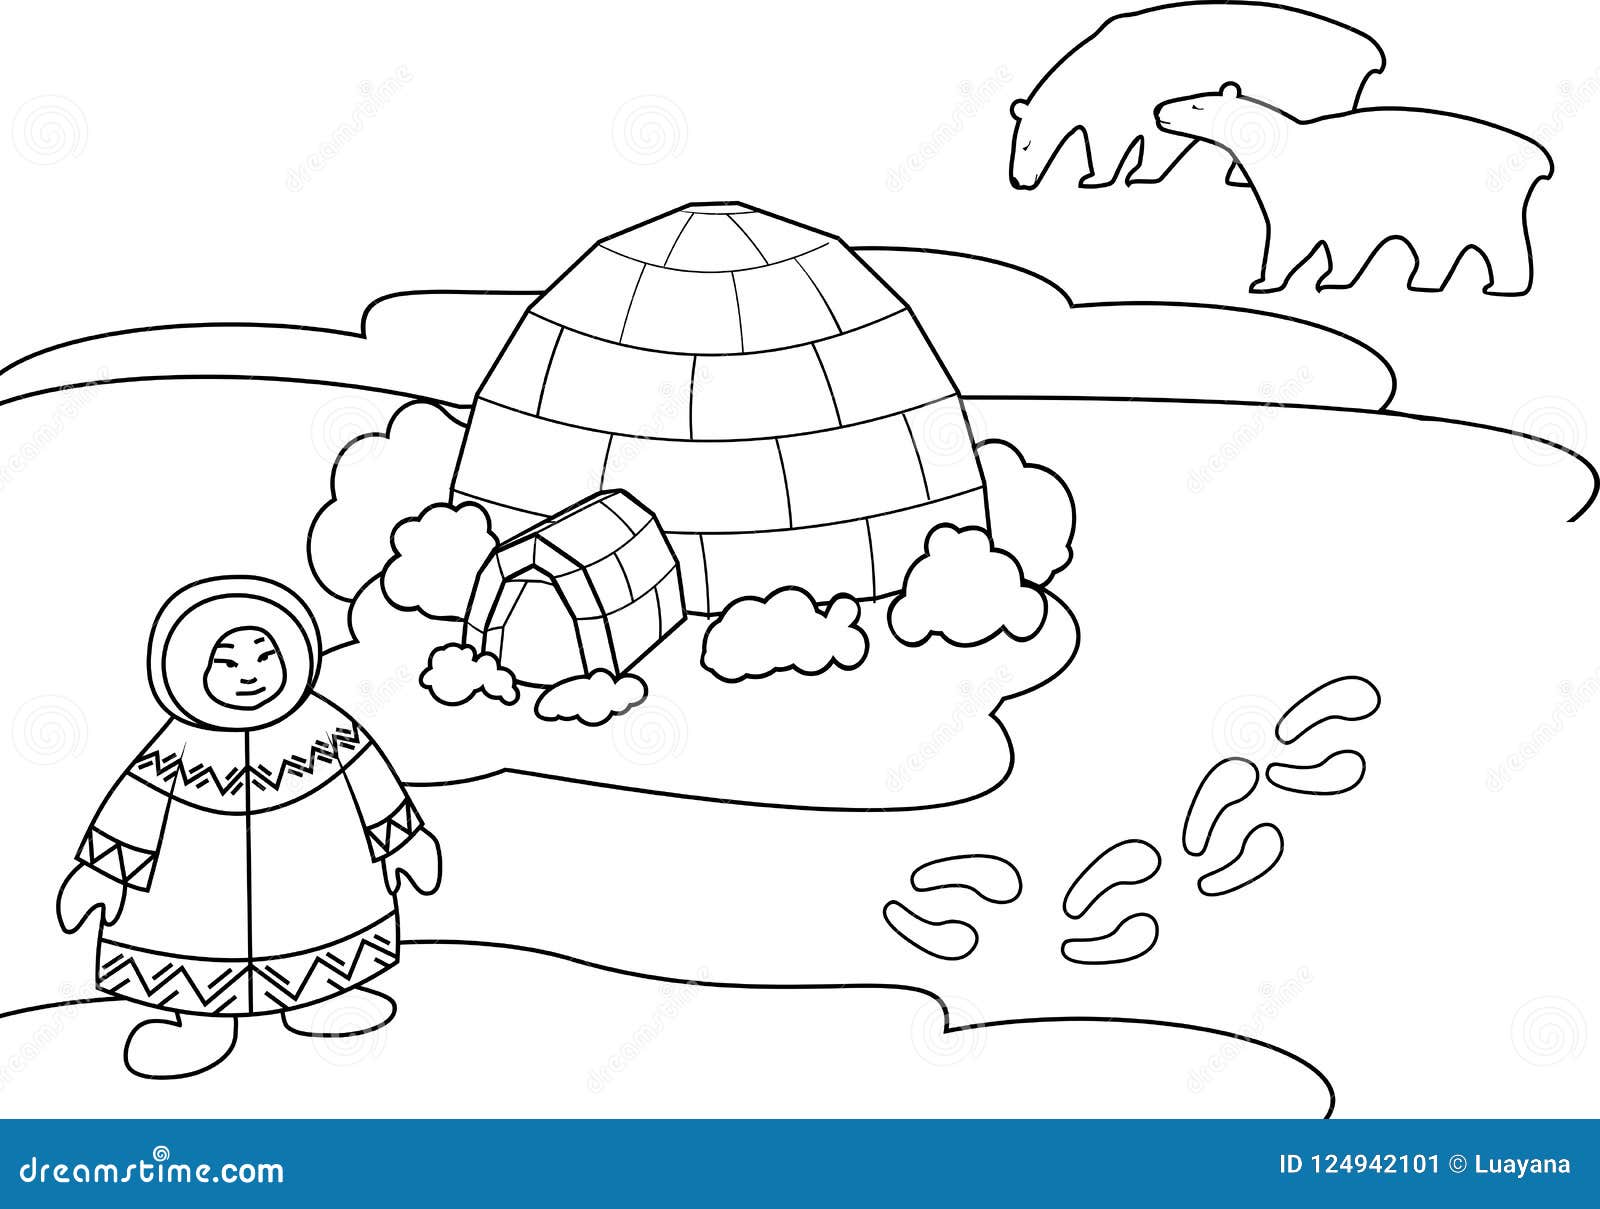 Coloring page arctic landscape with eskimo in national clothes igloo and stylized polar bear stock vector